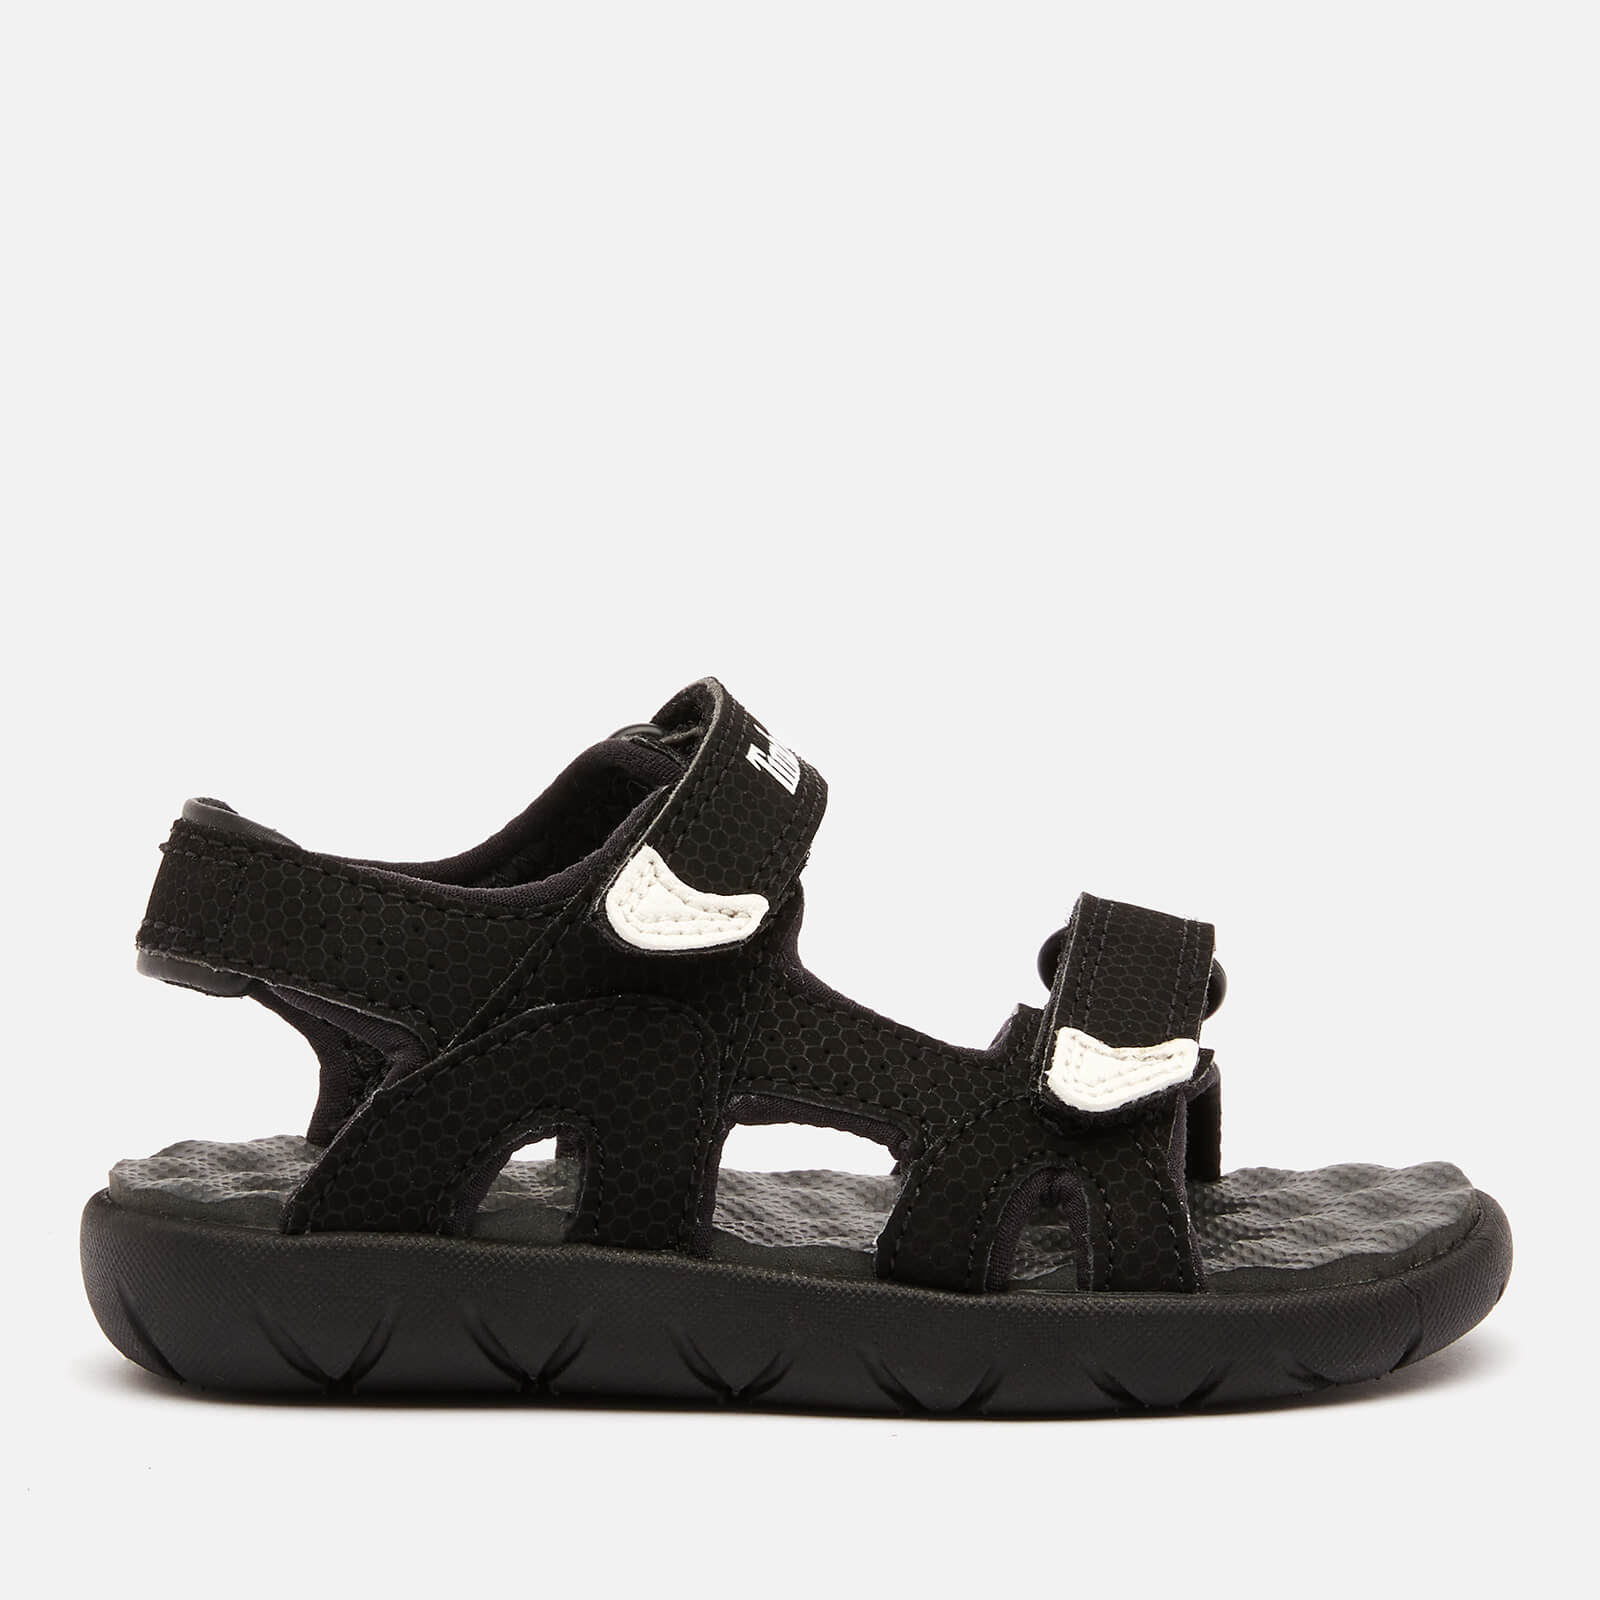 Timberland Toddlers' Perkins Row 2-Strap Sandals - Black